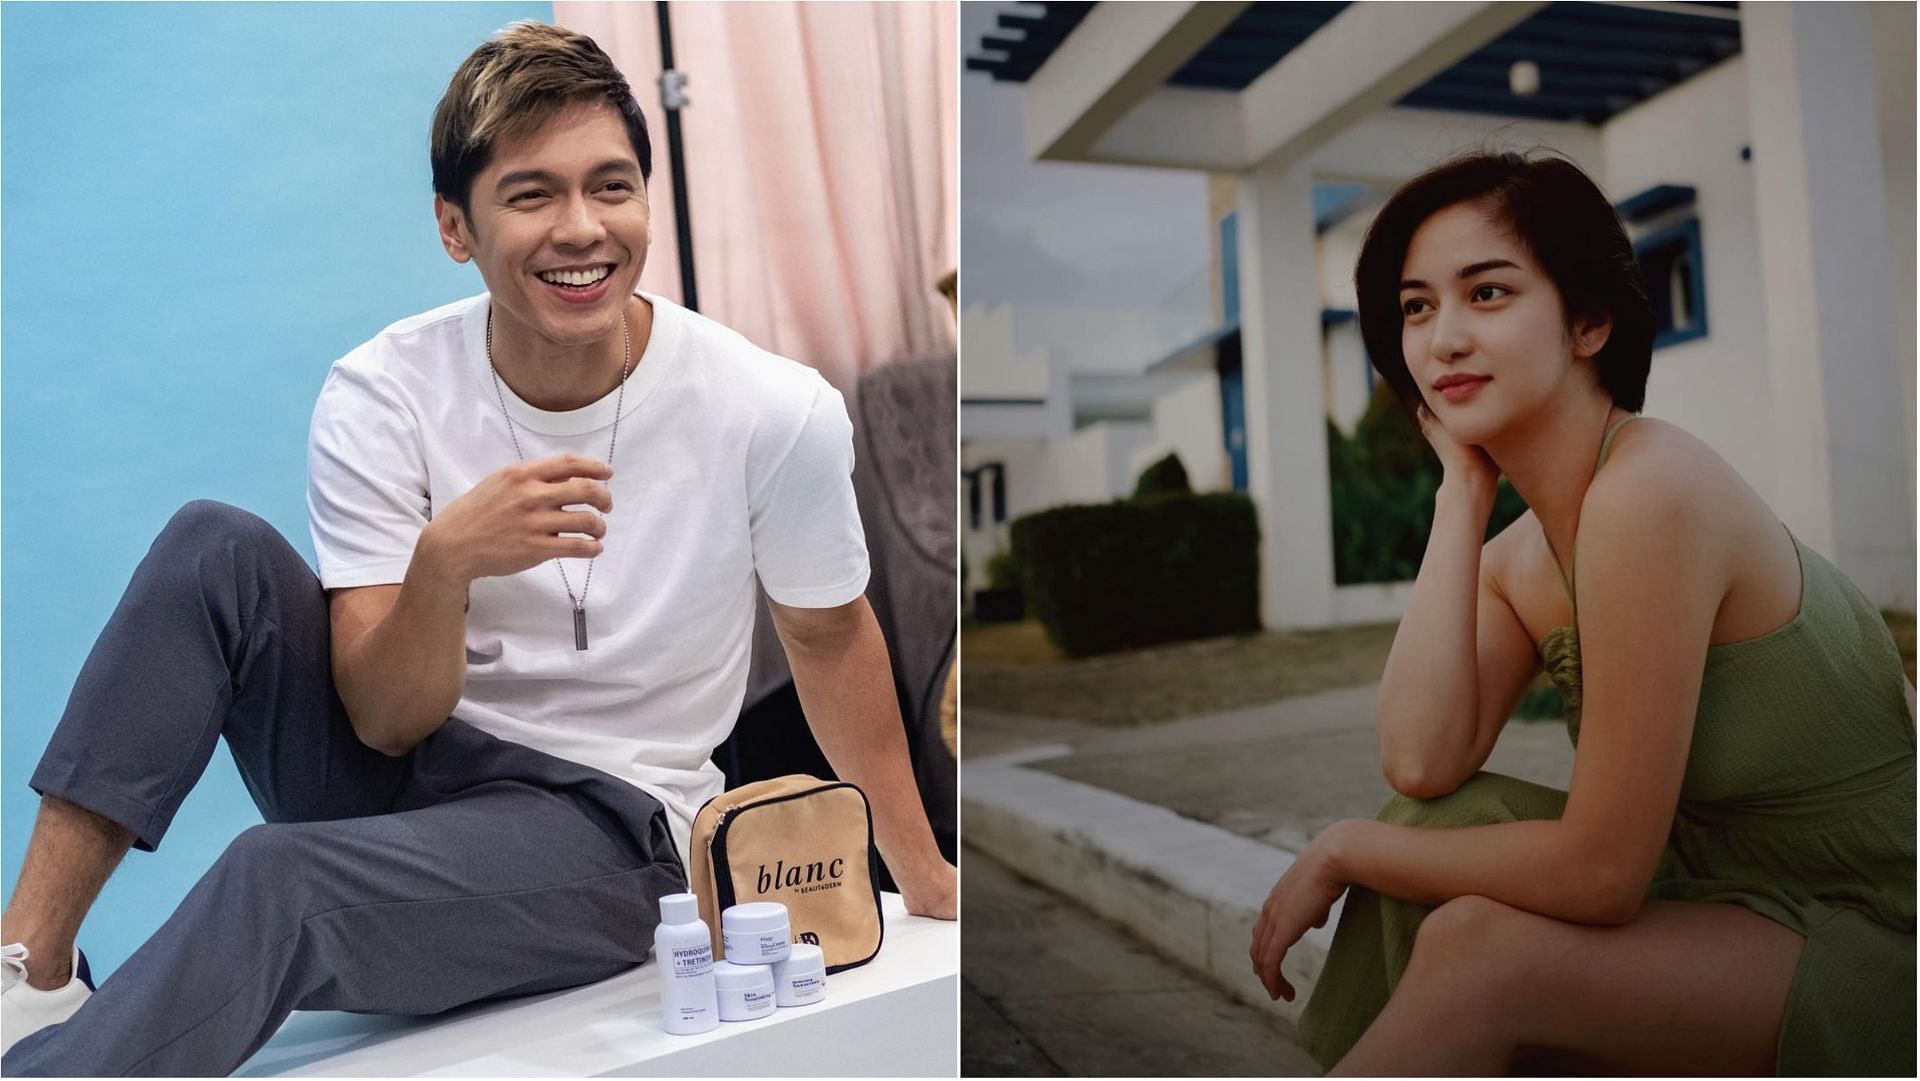 Carlo Aquino and Charlie Dizon are confirmed to be dating (Images via jose_liwanag and charliedizon_/Instagram)